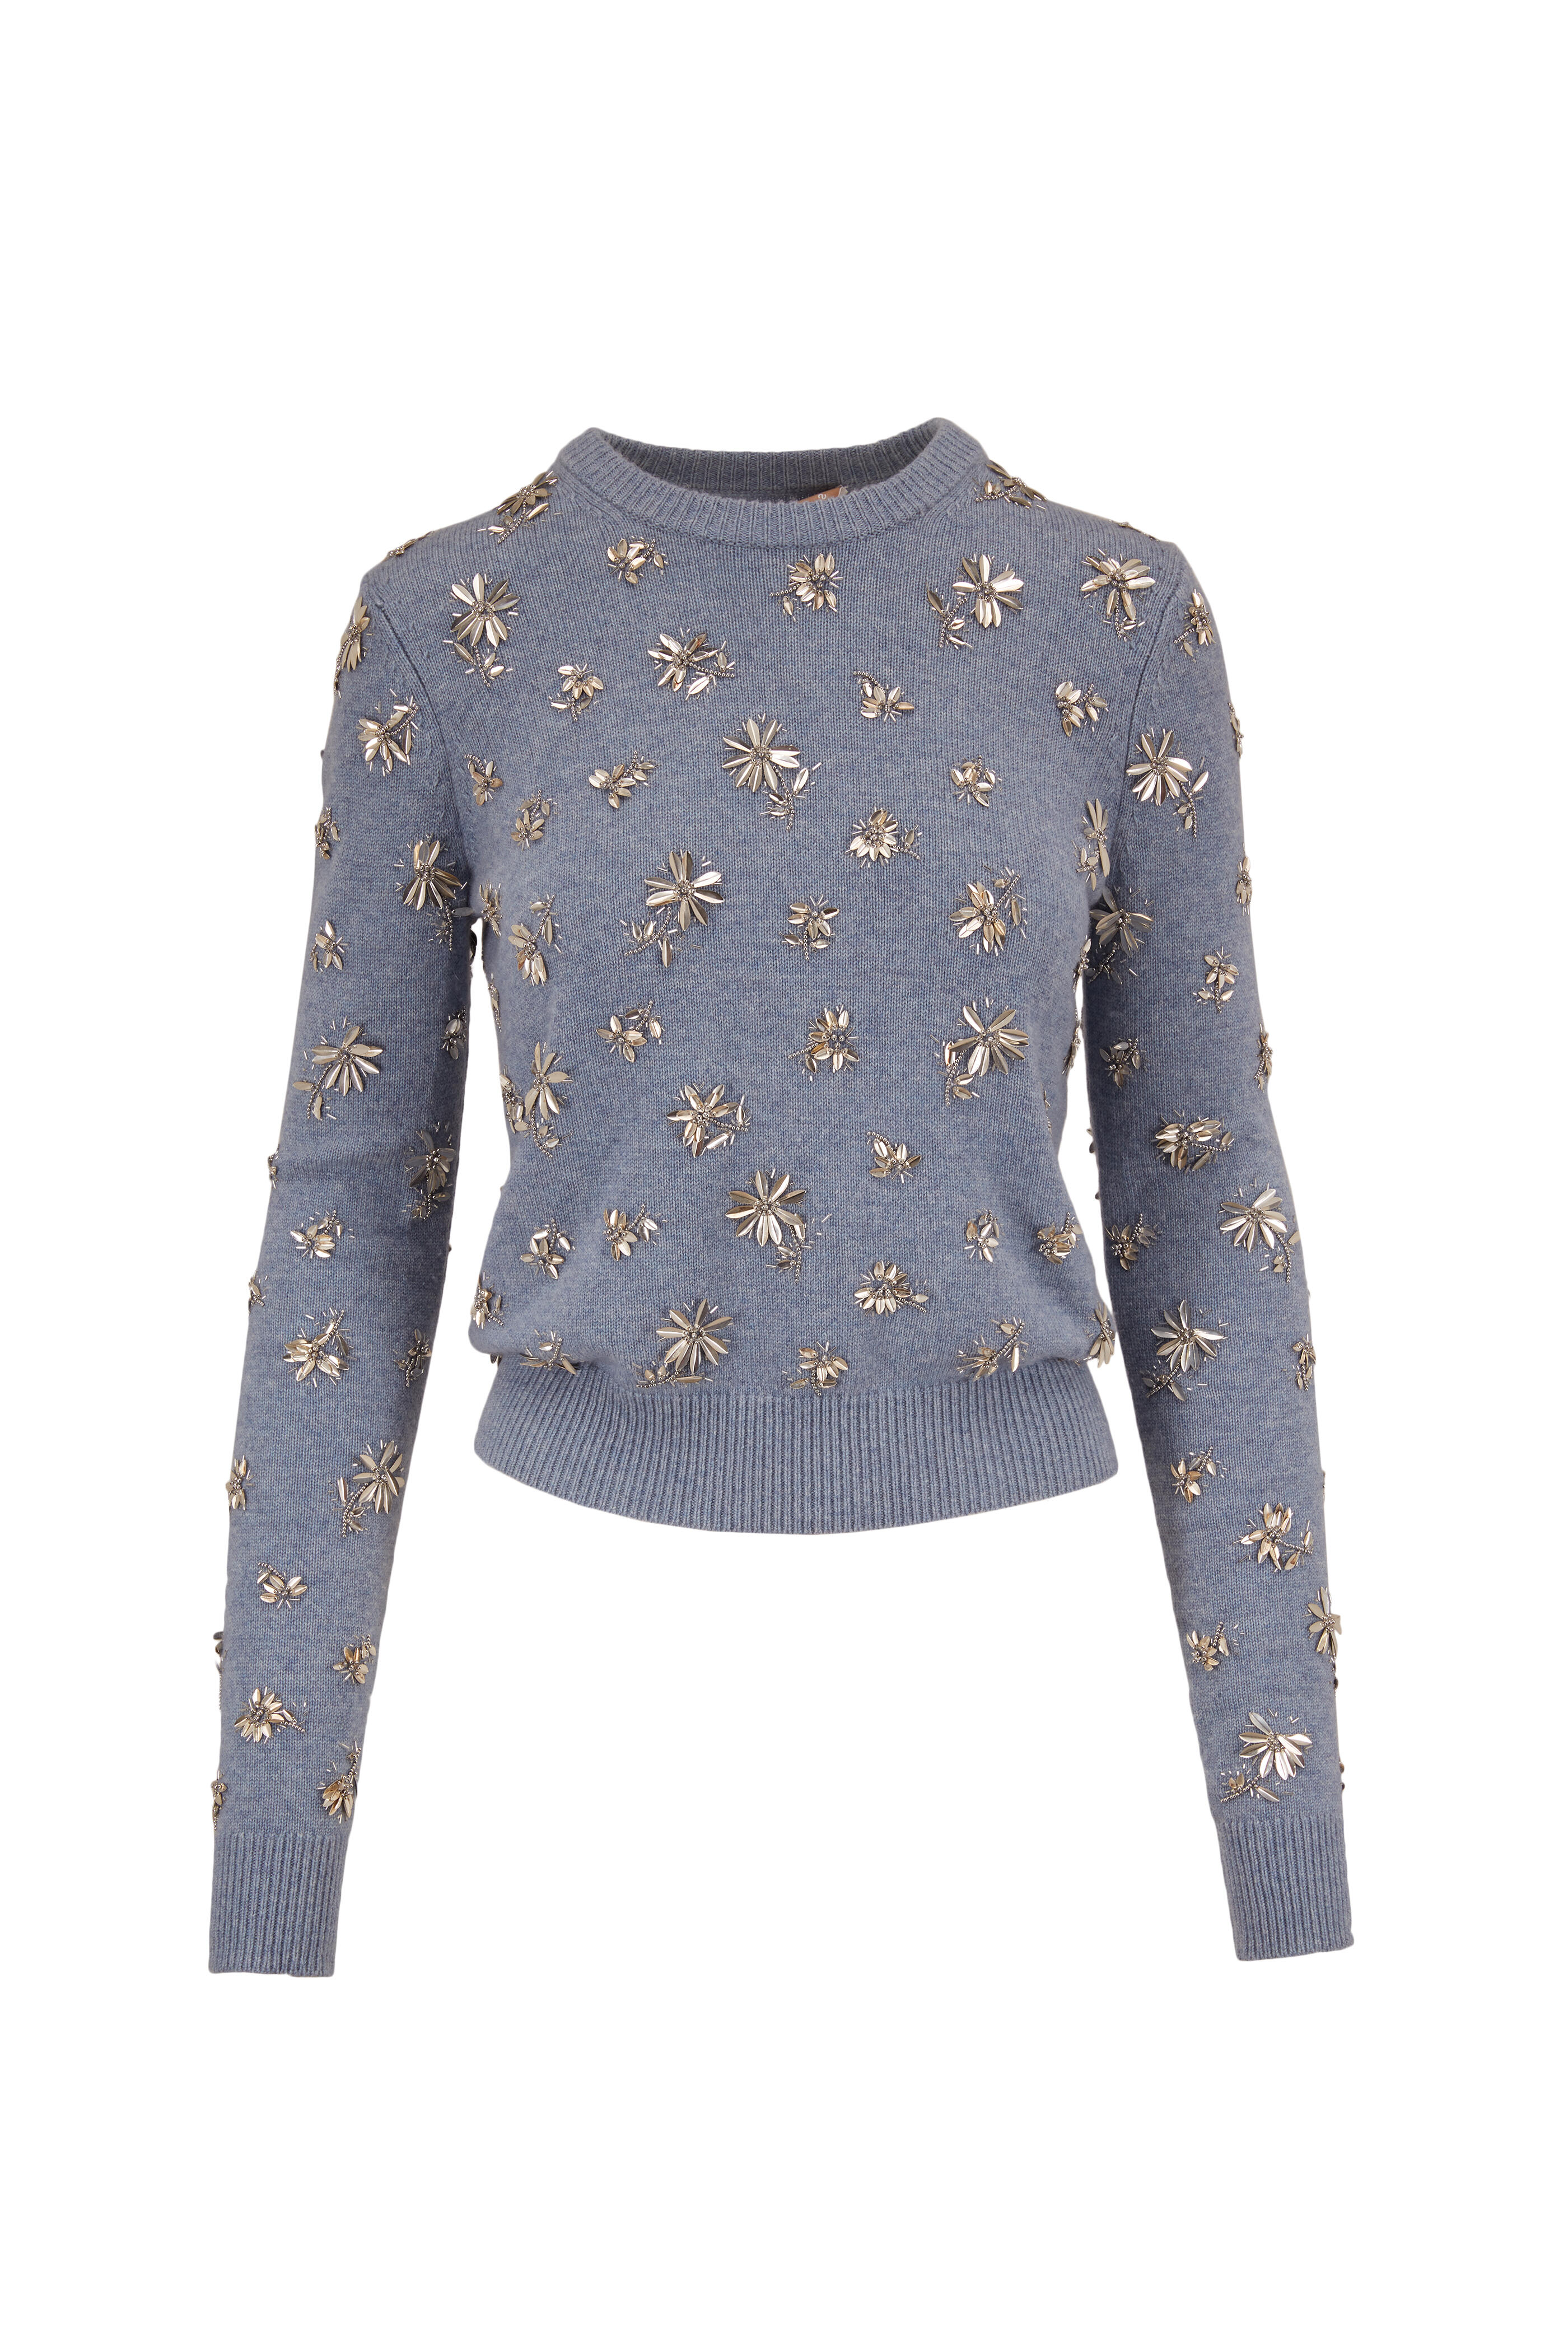 absceso Hacia aeropuerto Michael Kors Collection - Stream Melange Cashmere Floral Embellished Sweater